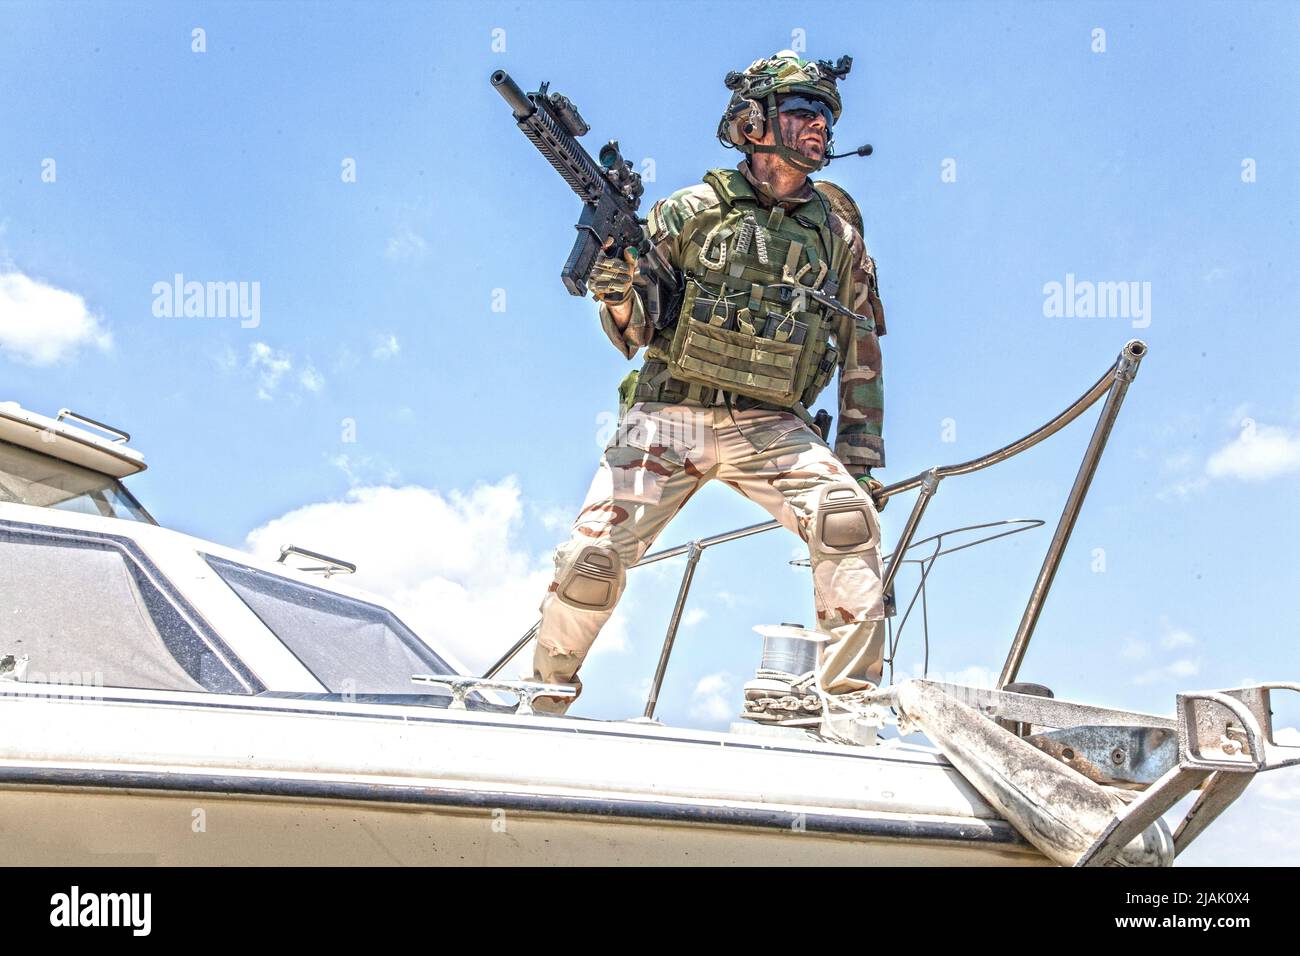 Special forces soldier armed with rifle, standing on bow of a speed boat. Stock Photo